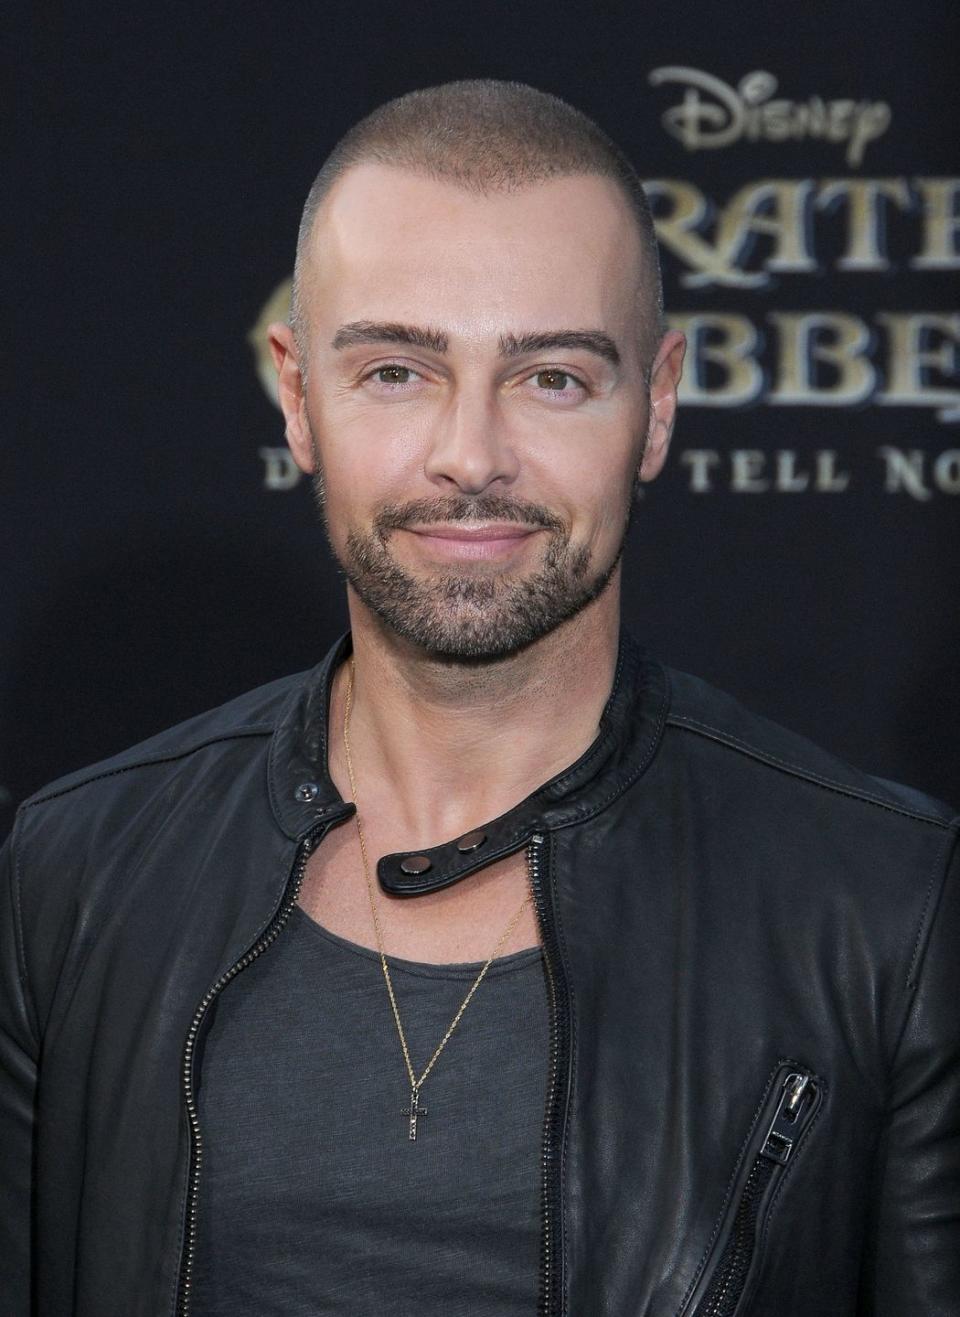 NOW: Joey Lawrence